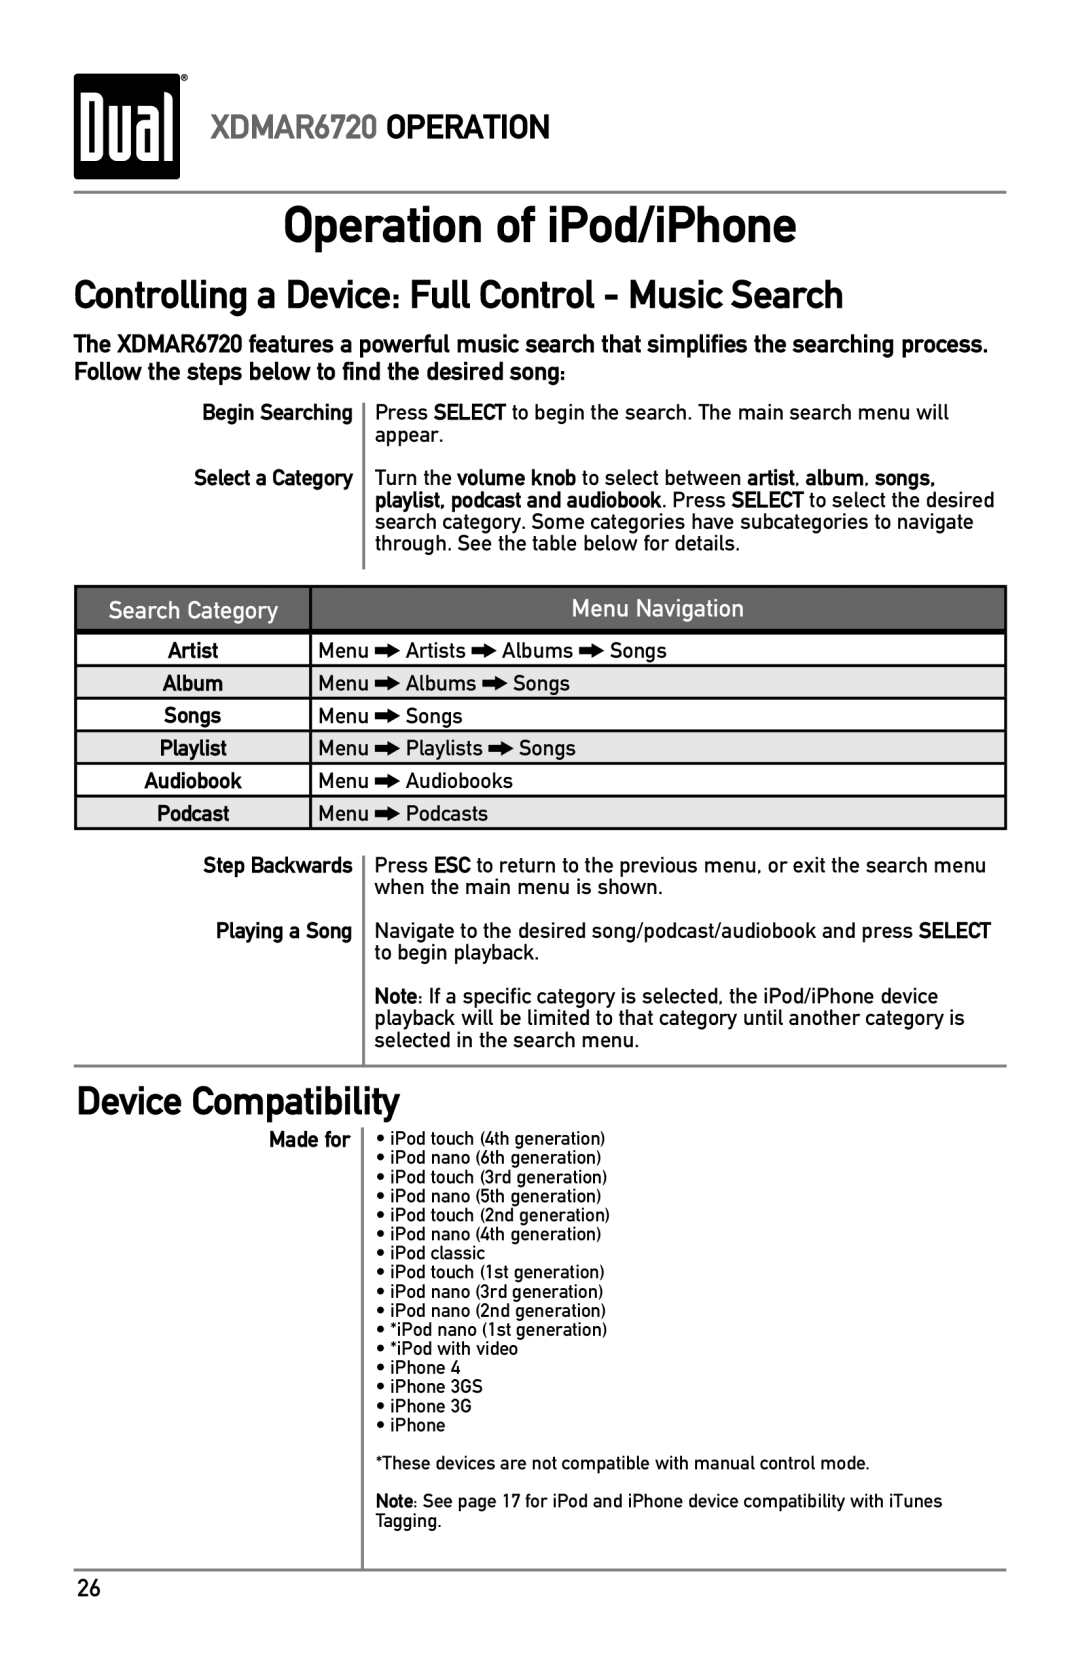 Dual XDMAR6720 Operation of iPod/iPhone, Controlling a Device Full Control Music Search, Device Compatibility, Made for 